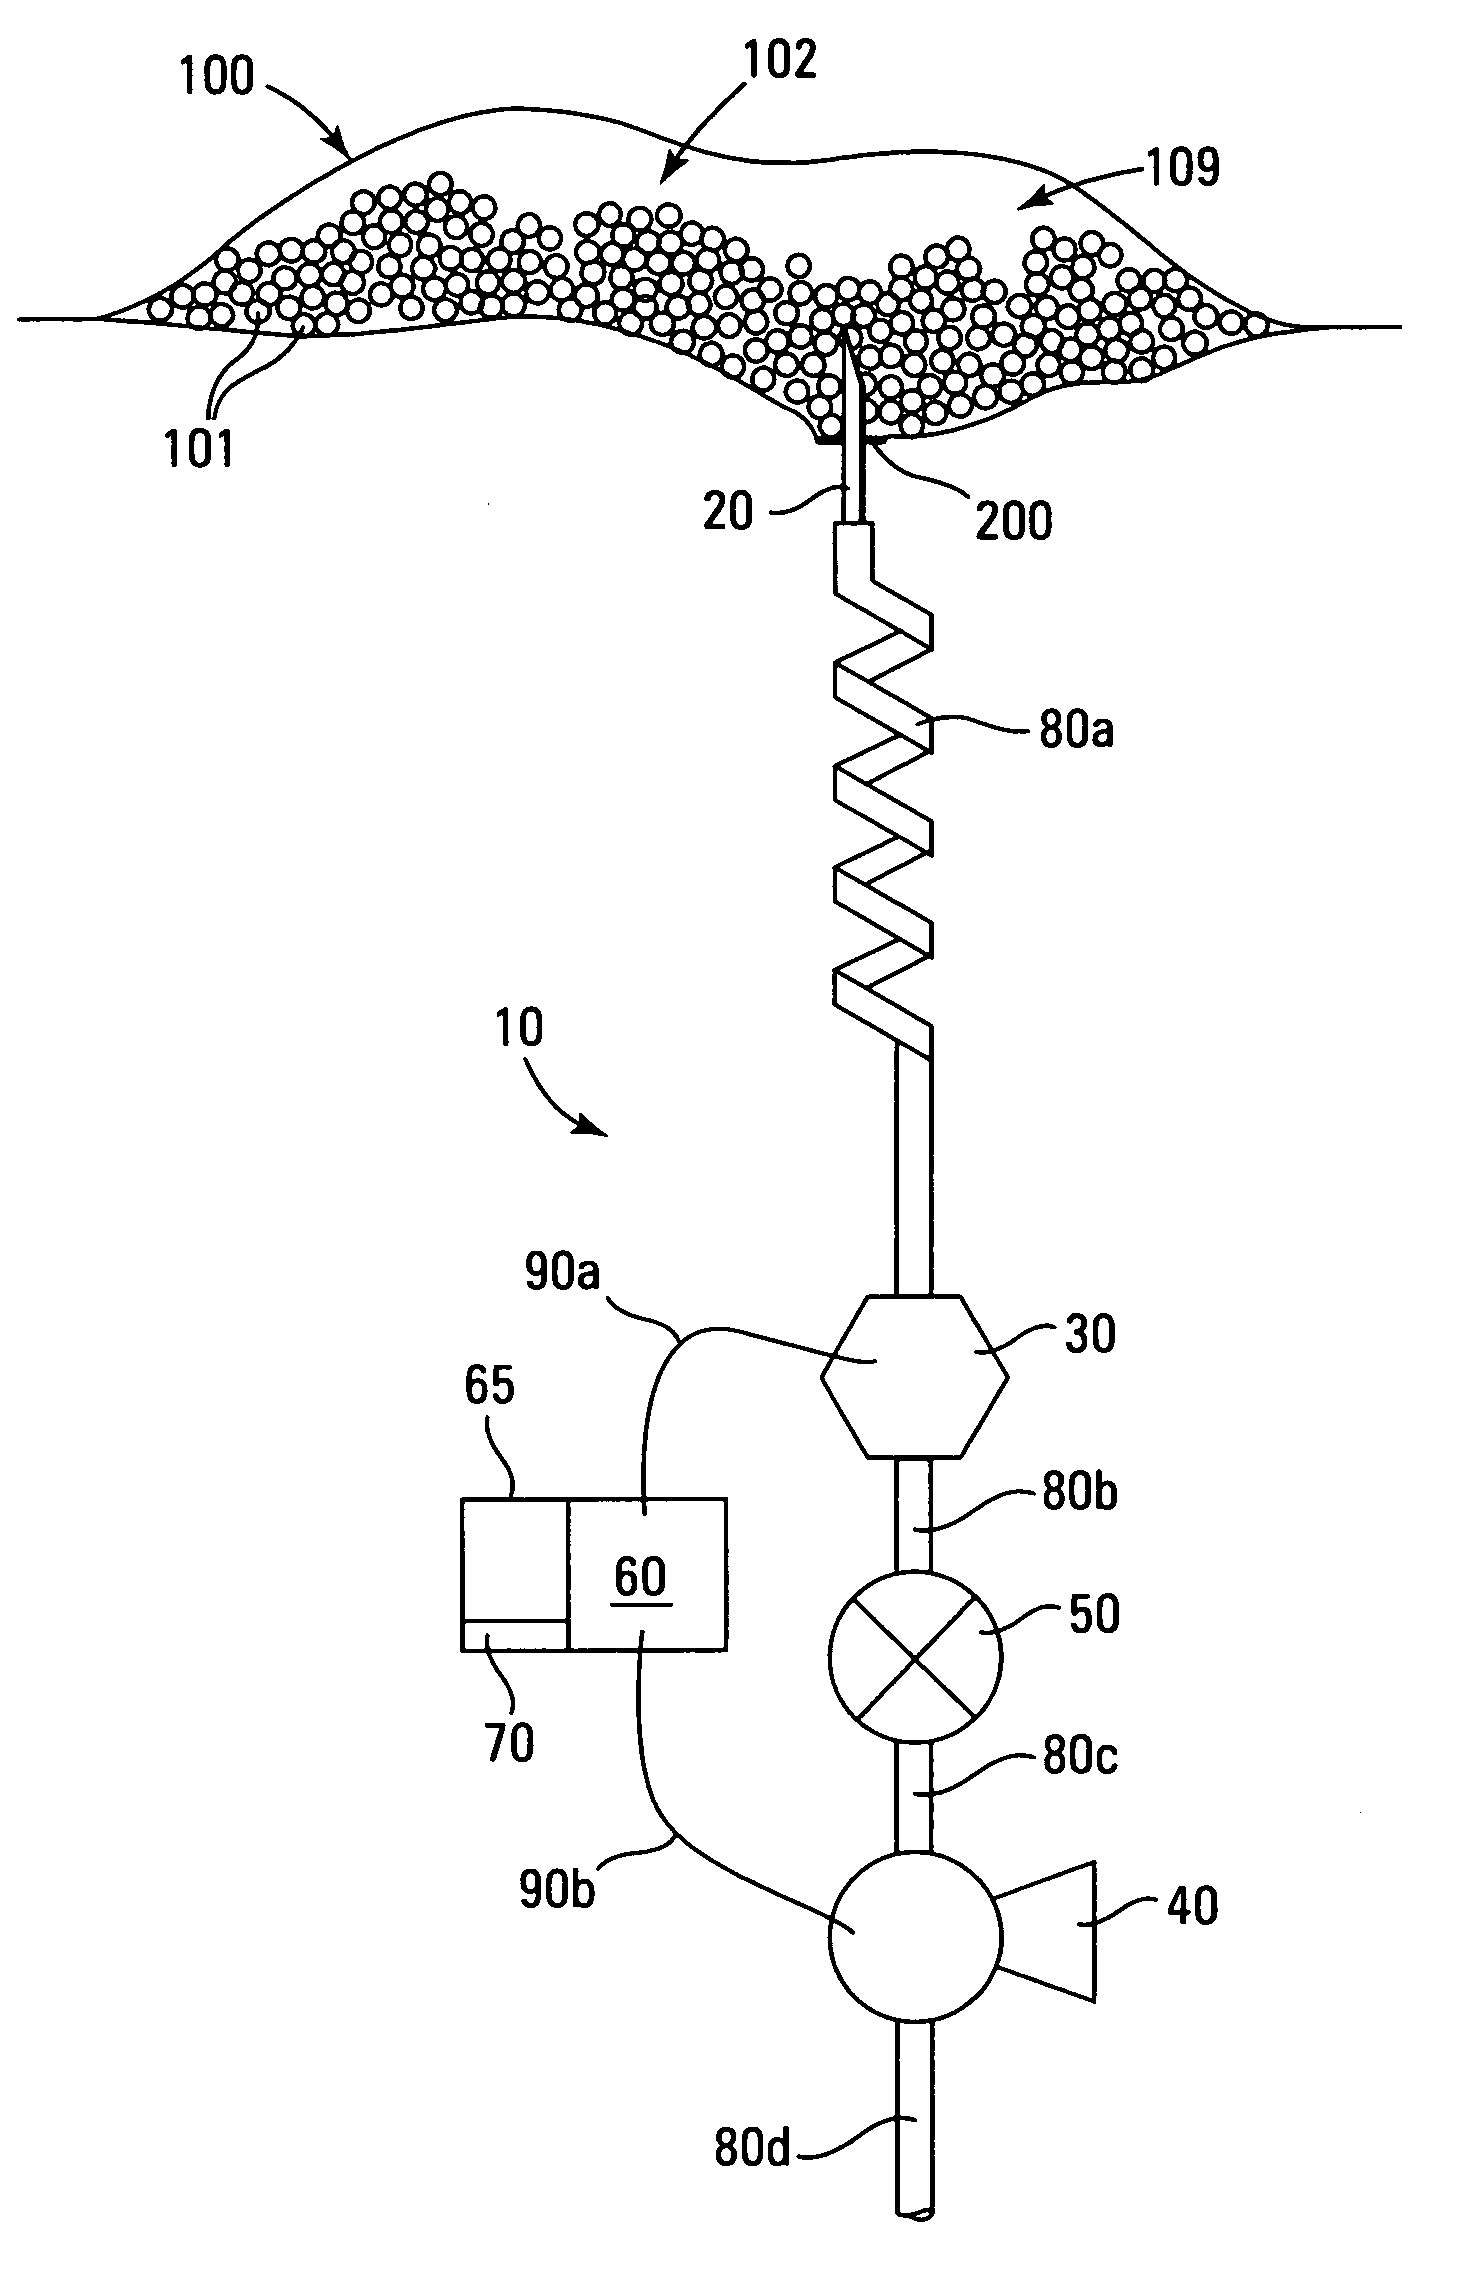 Instrument for accurately measuring mass flow rate of a fluid pumped from a hermetically sealed container